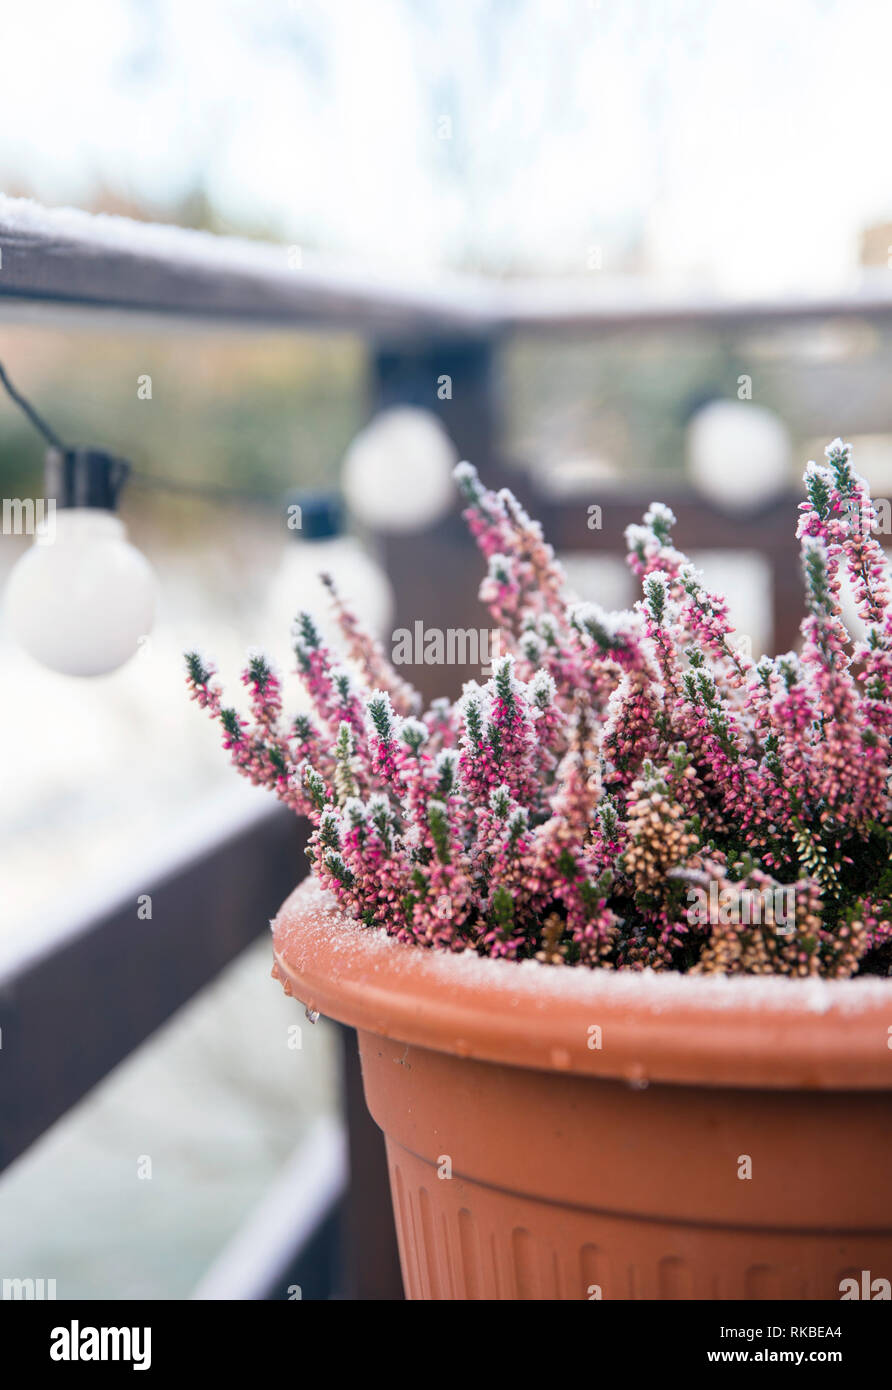 Pink heather flower growing in terracotta color garden pot, outdoors on terrace in winter, covered with white frost. Stock Photo